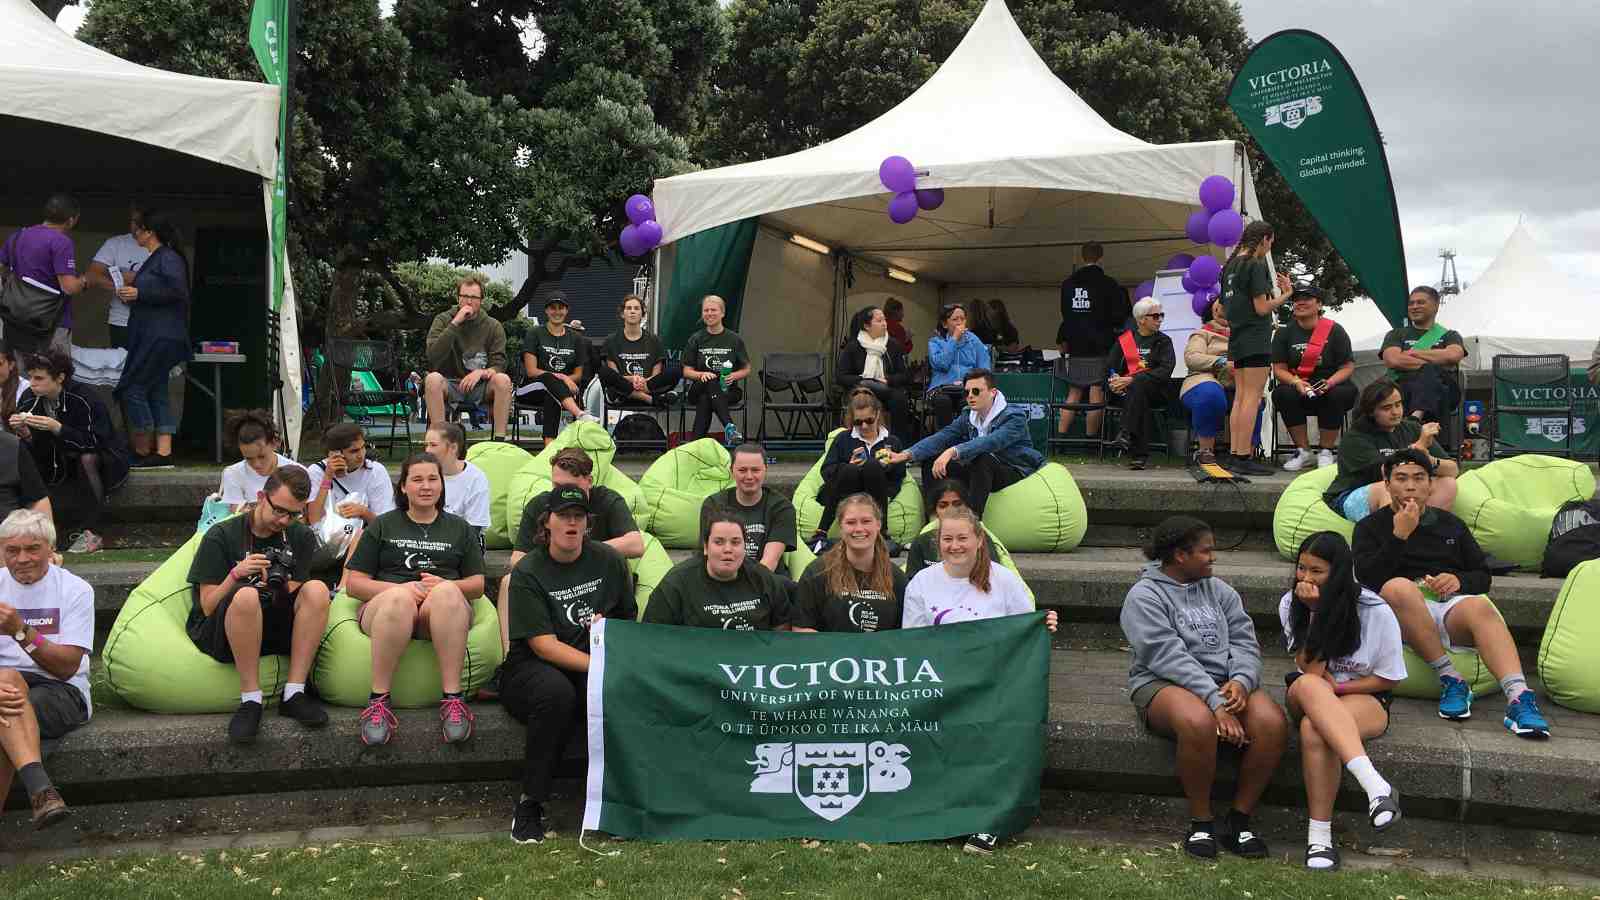 Victoria's Relay for Life team